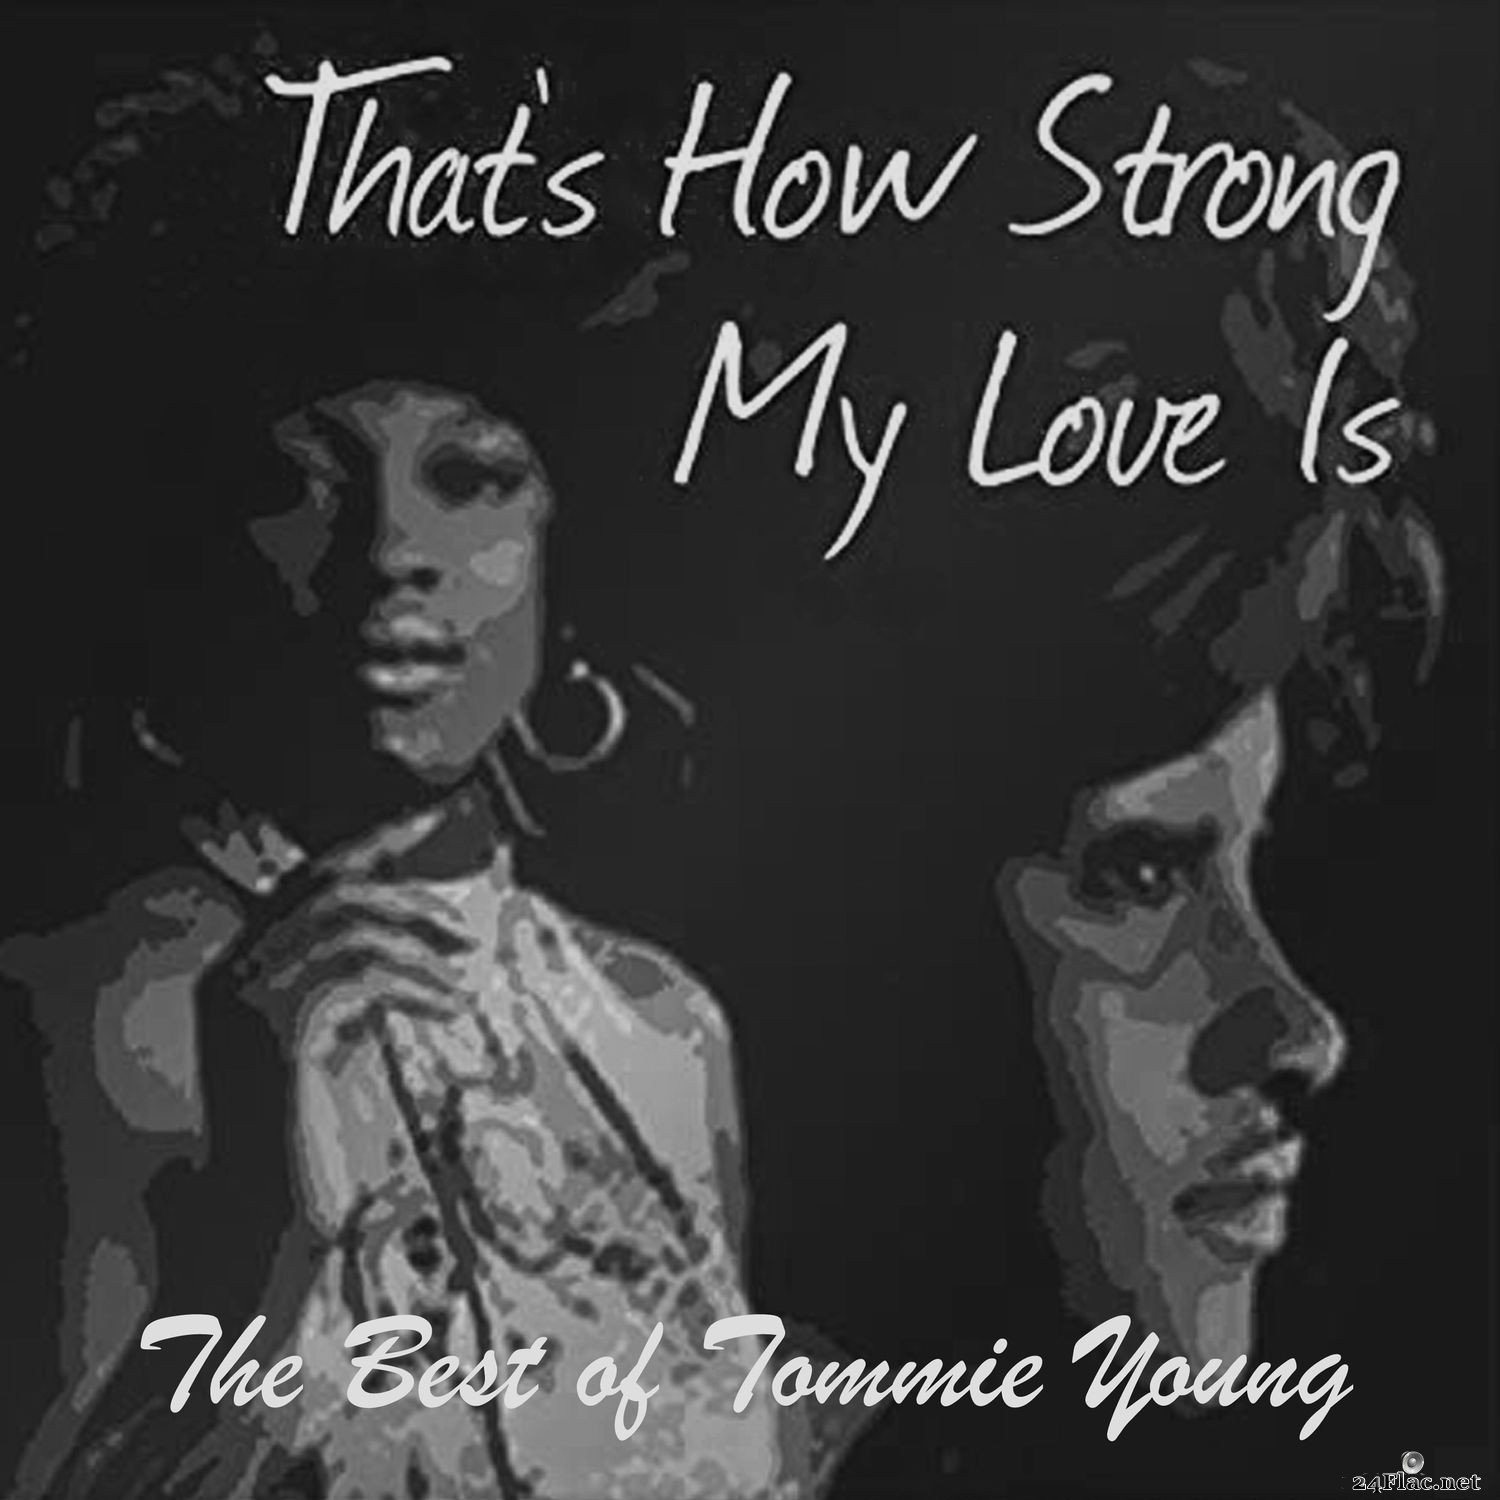 Tommie Young - That's How Strong My Love is: The Best of Tommie Young (2019) Hi-Res